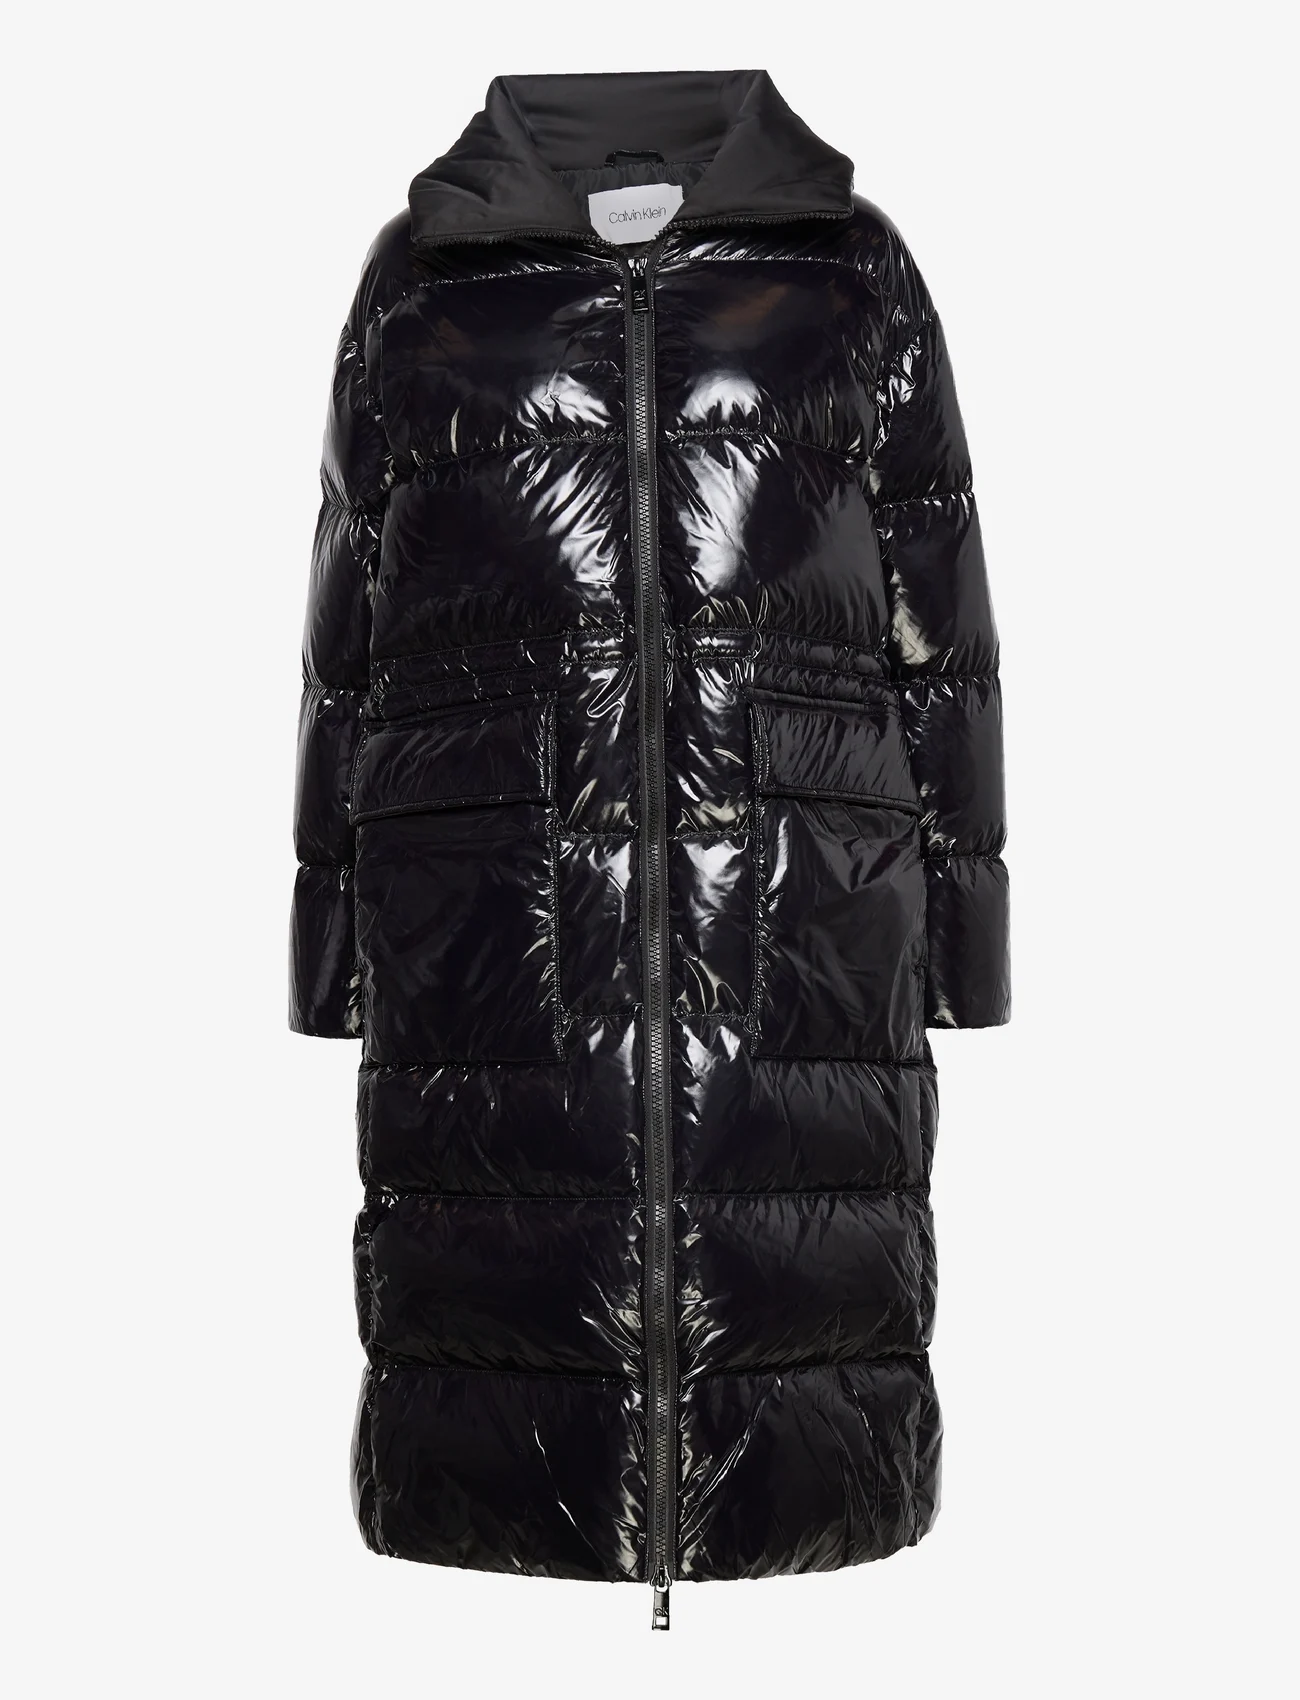 Calvin Klein High Shine Padded Puffer Coat  €. Buy Padded Coats  from Calvin Klein online at . Fast delivery and easy returns